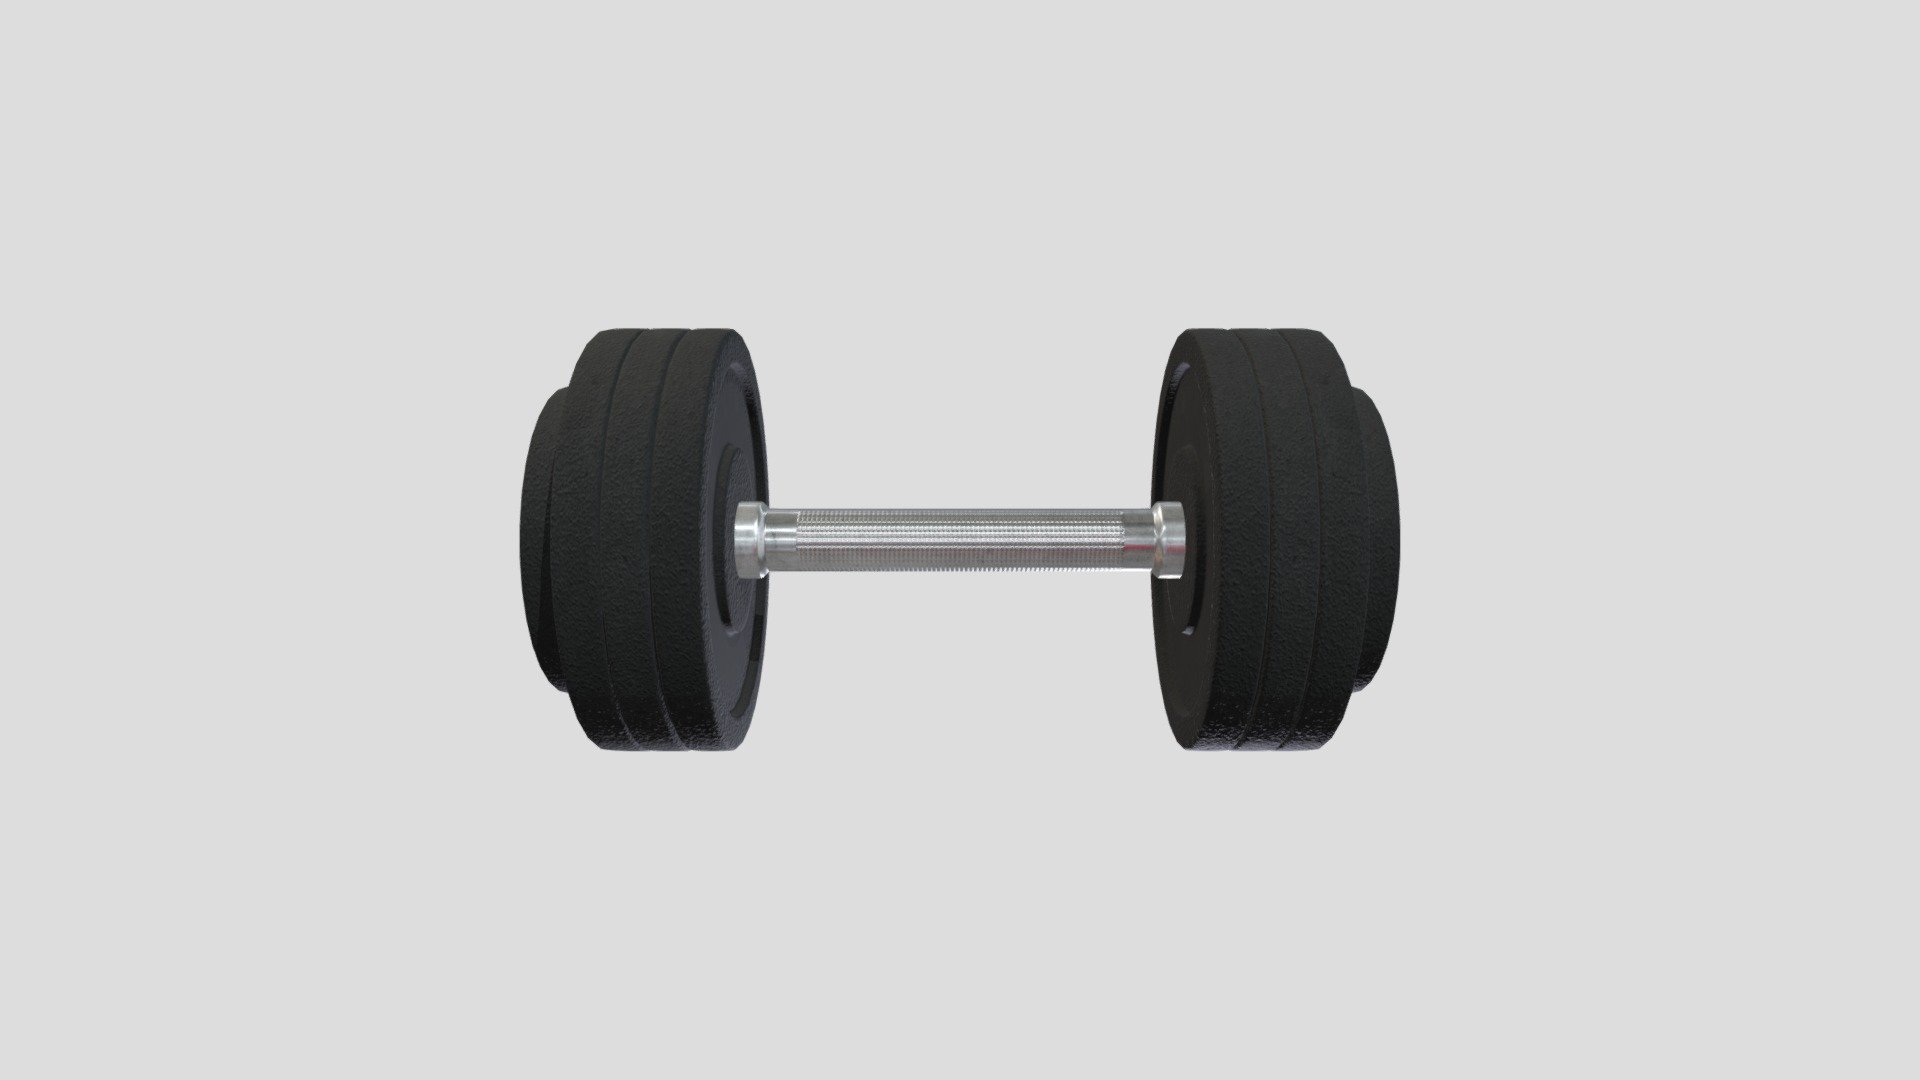 Dumbbell 3D model is a high quality, photo real model that will enhance detail and realism to any of your game projects or commercials. The model has a fully textured, detailed design that allows for close-up renders 3d model